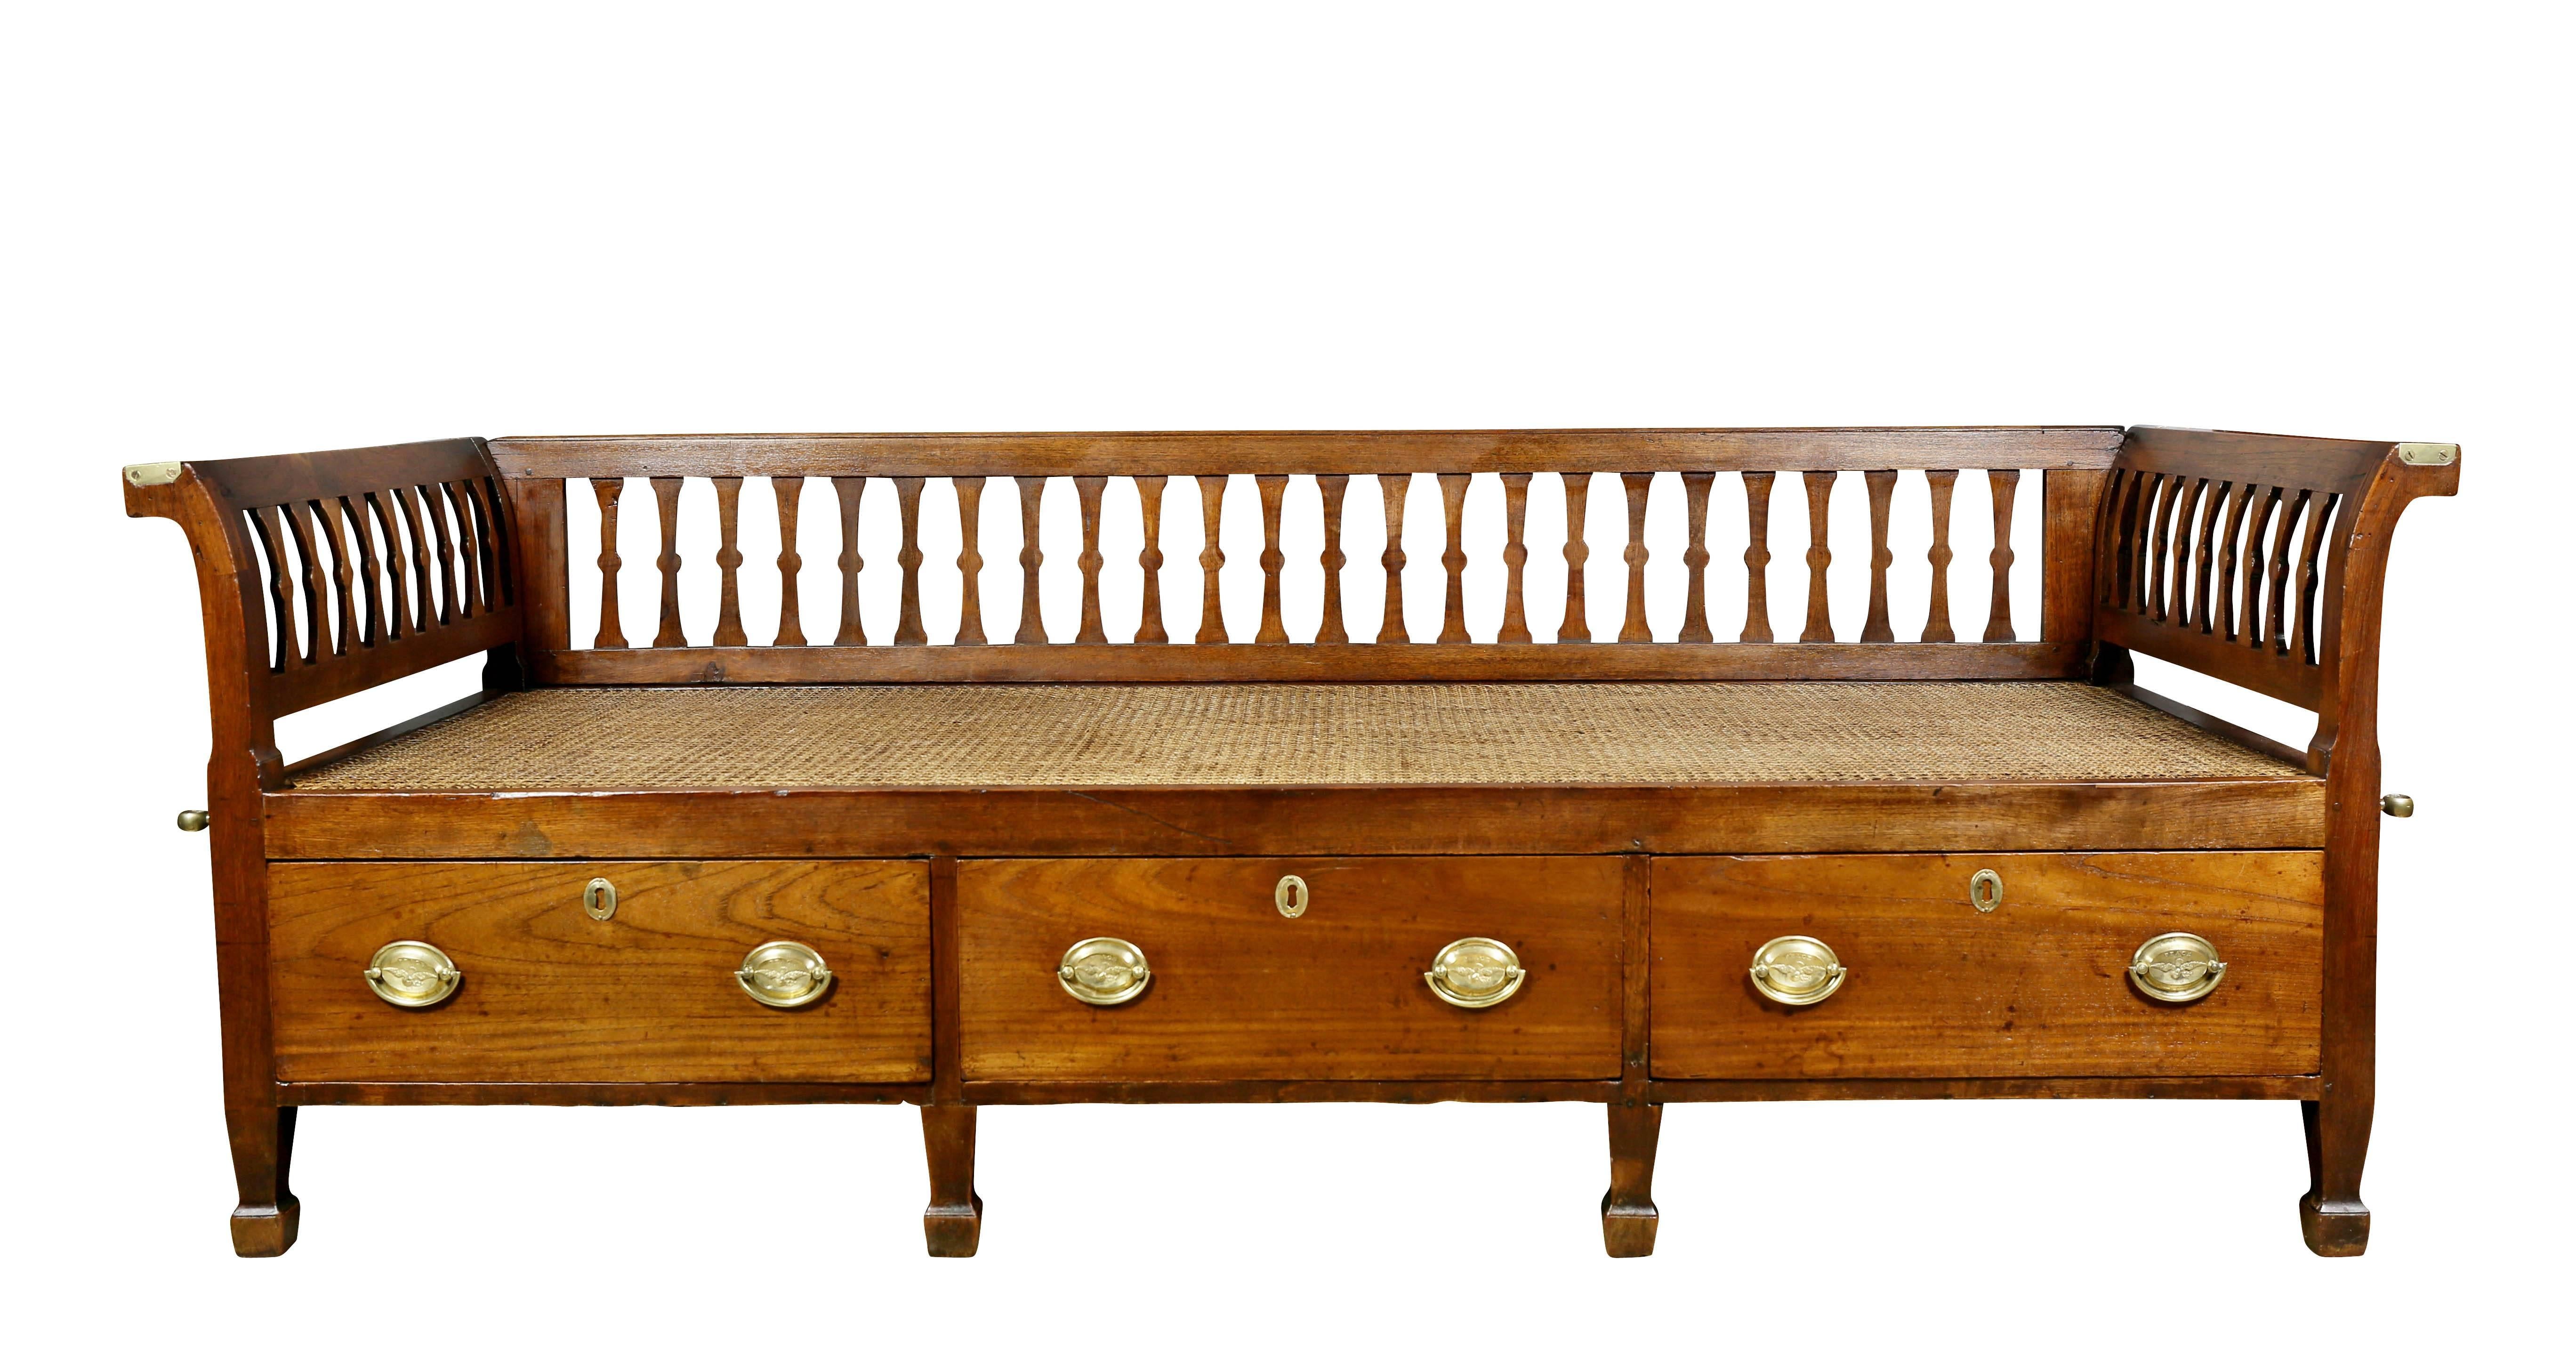 With detachable slat back and slightly scrolled arms over a caned seat over three drawers, raised on square tapered legs. Carrying handles on sides and brass fittings presumably for mosquito netting or canopy.